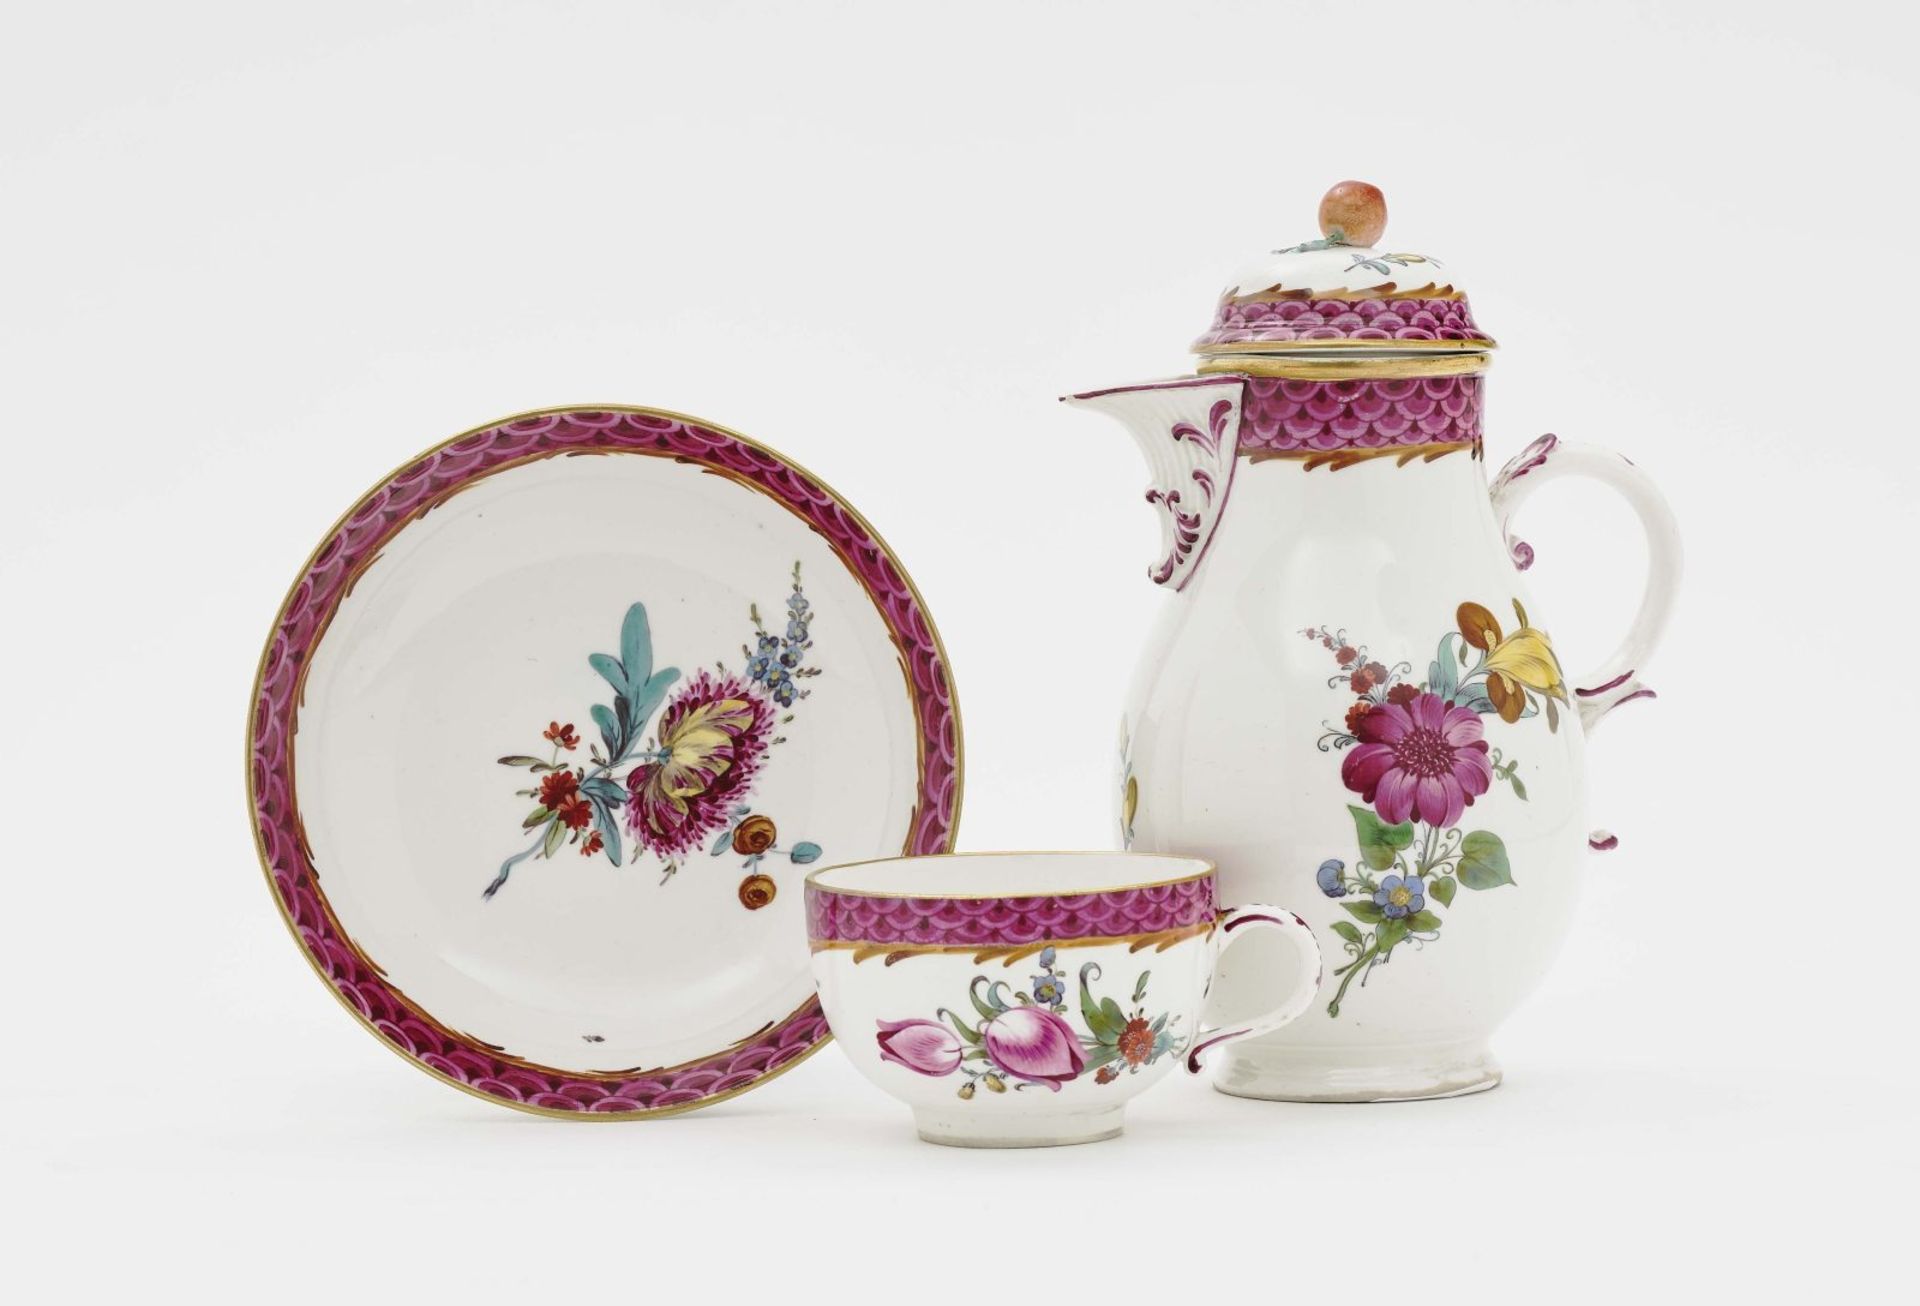 A mocha pot and cup with saucerHöchst, circa 1770 Porcelain. Polychrome and gold decoration.